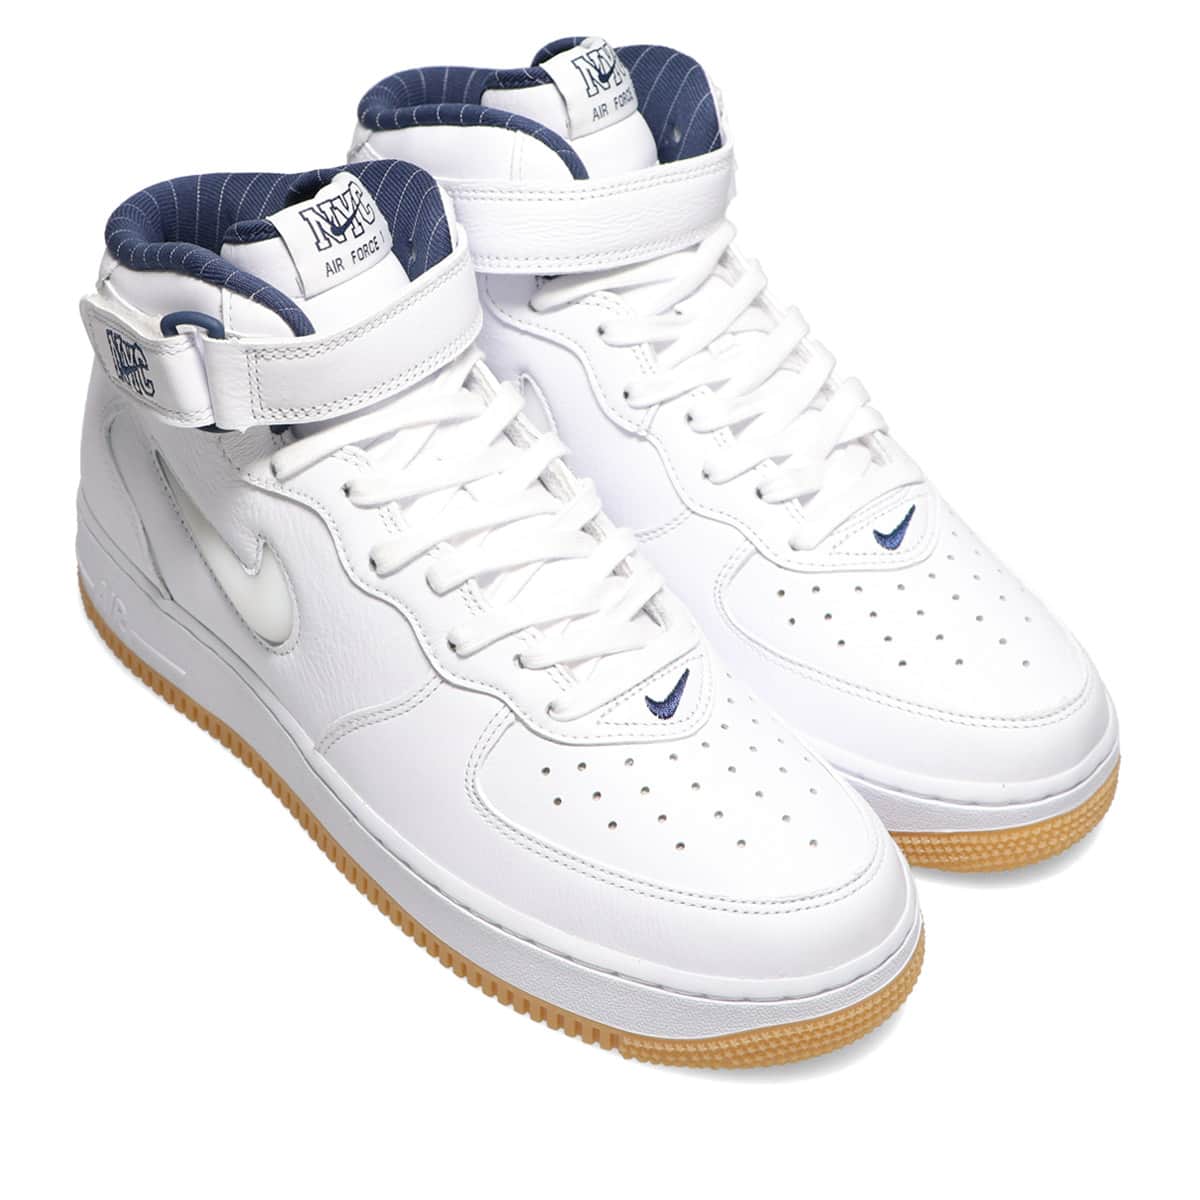 NIKE AIR FORCE 1 MID QS WHITE/WHITE-MIDNIGHT NAVY-GUM YELLOW 21FA-S_photo_large